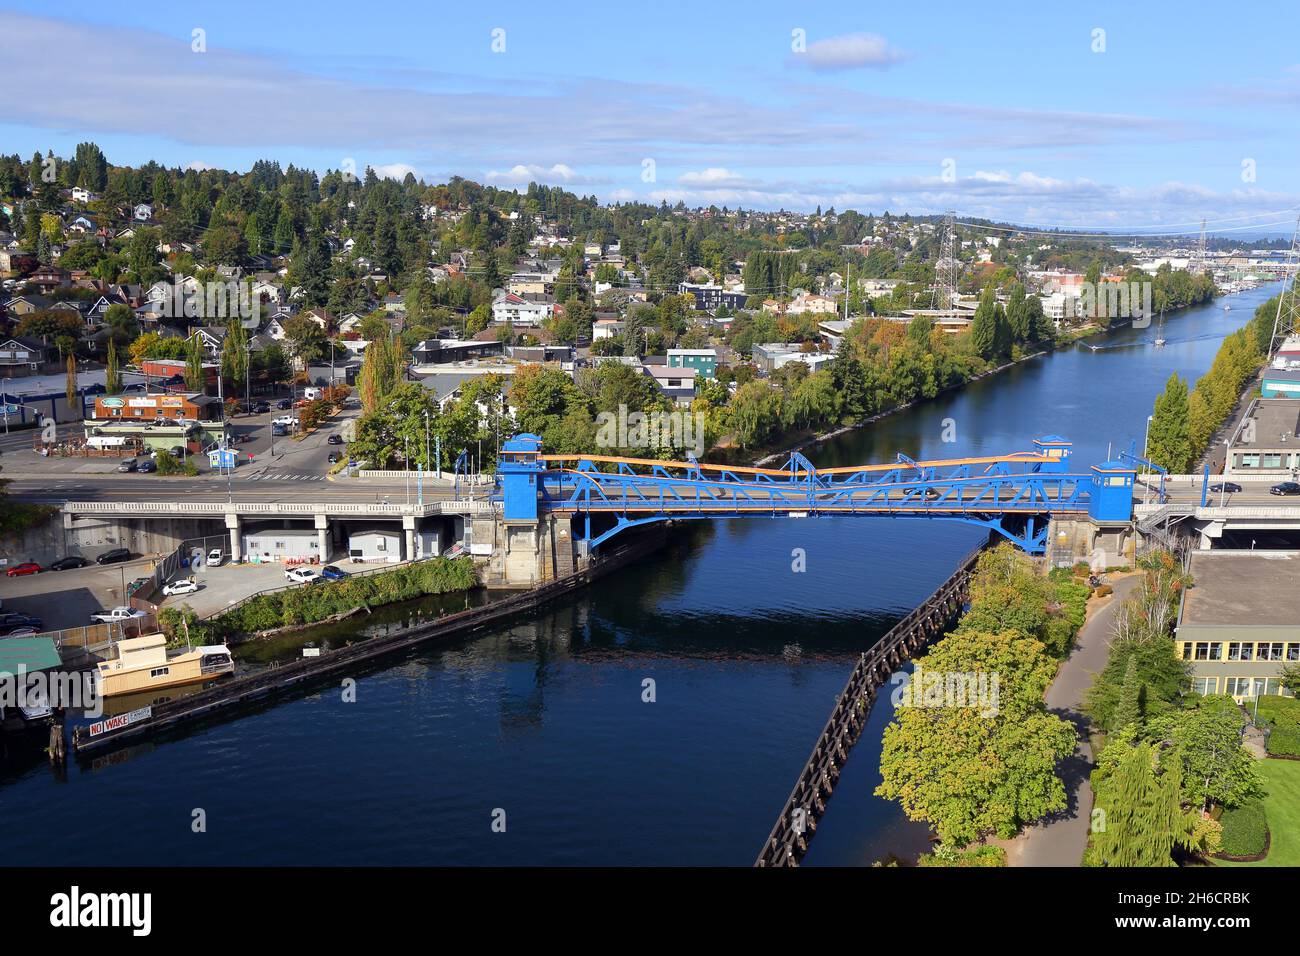 Fremont Bridge, Seattle, Washington. The landmarked bridge spans over the Fremont Cut connecting the North Queen Anne and Fremont neighborhoods. Stock Photo